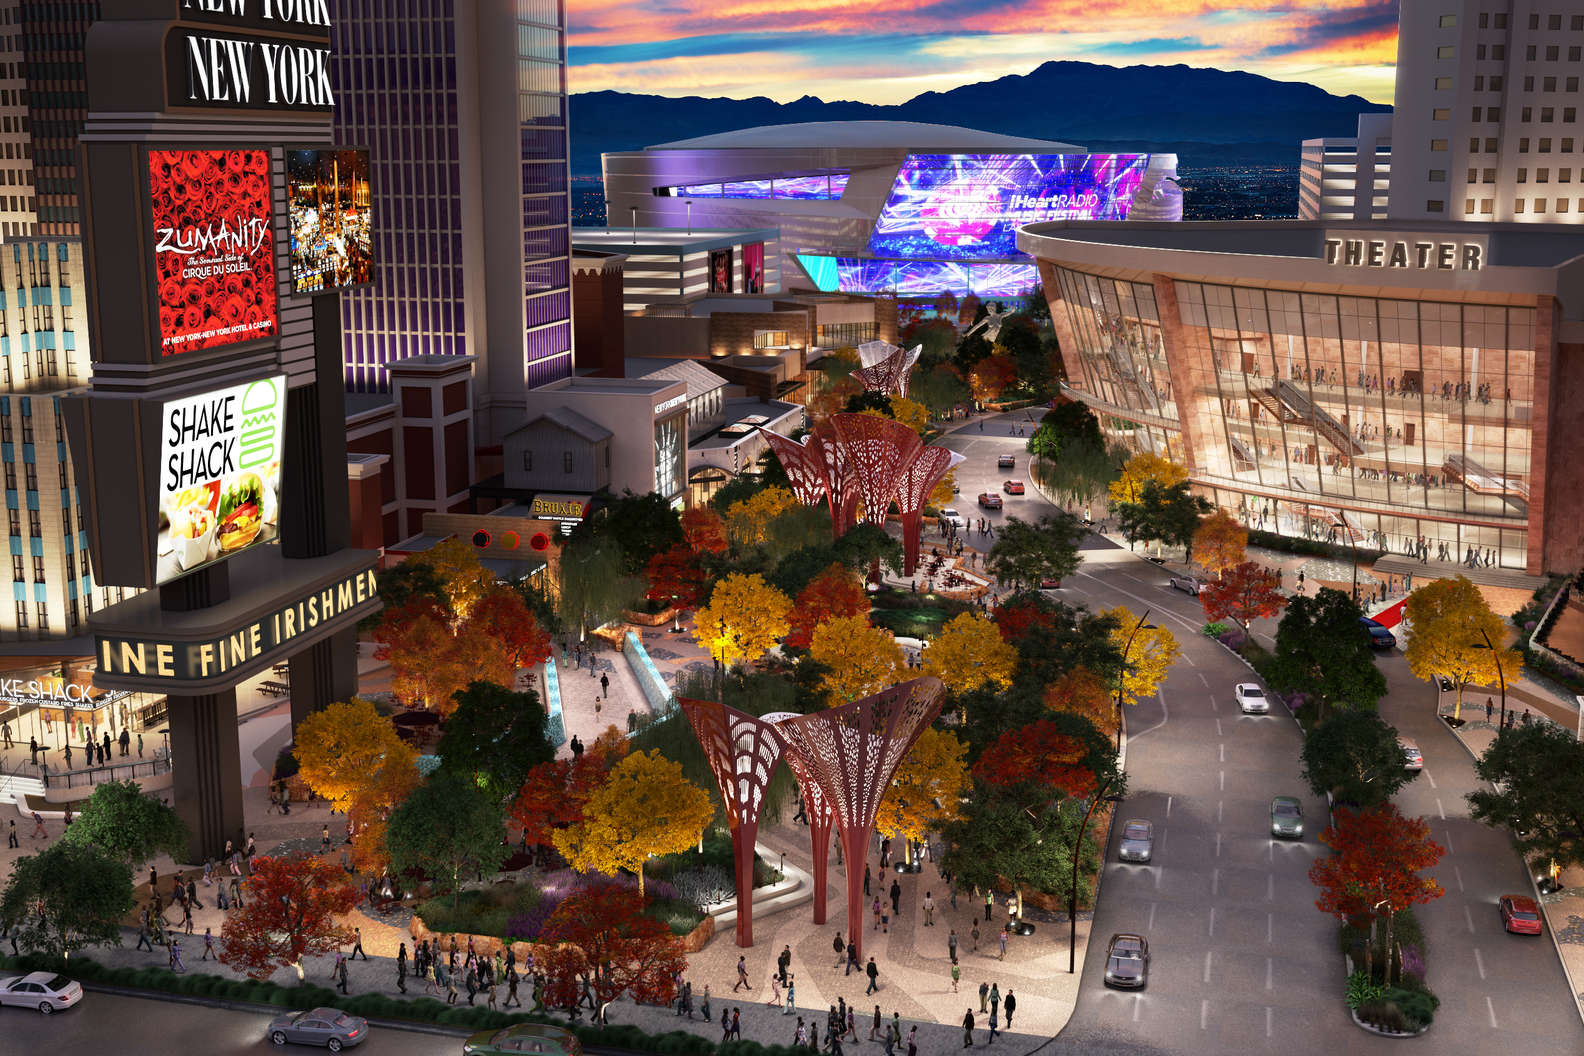 13 CHANGES COMING TO THE VEGAS STRIP IN 2016